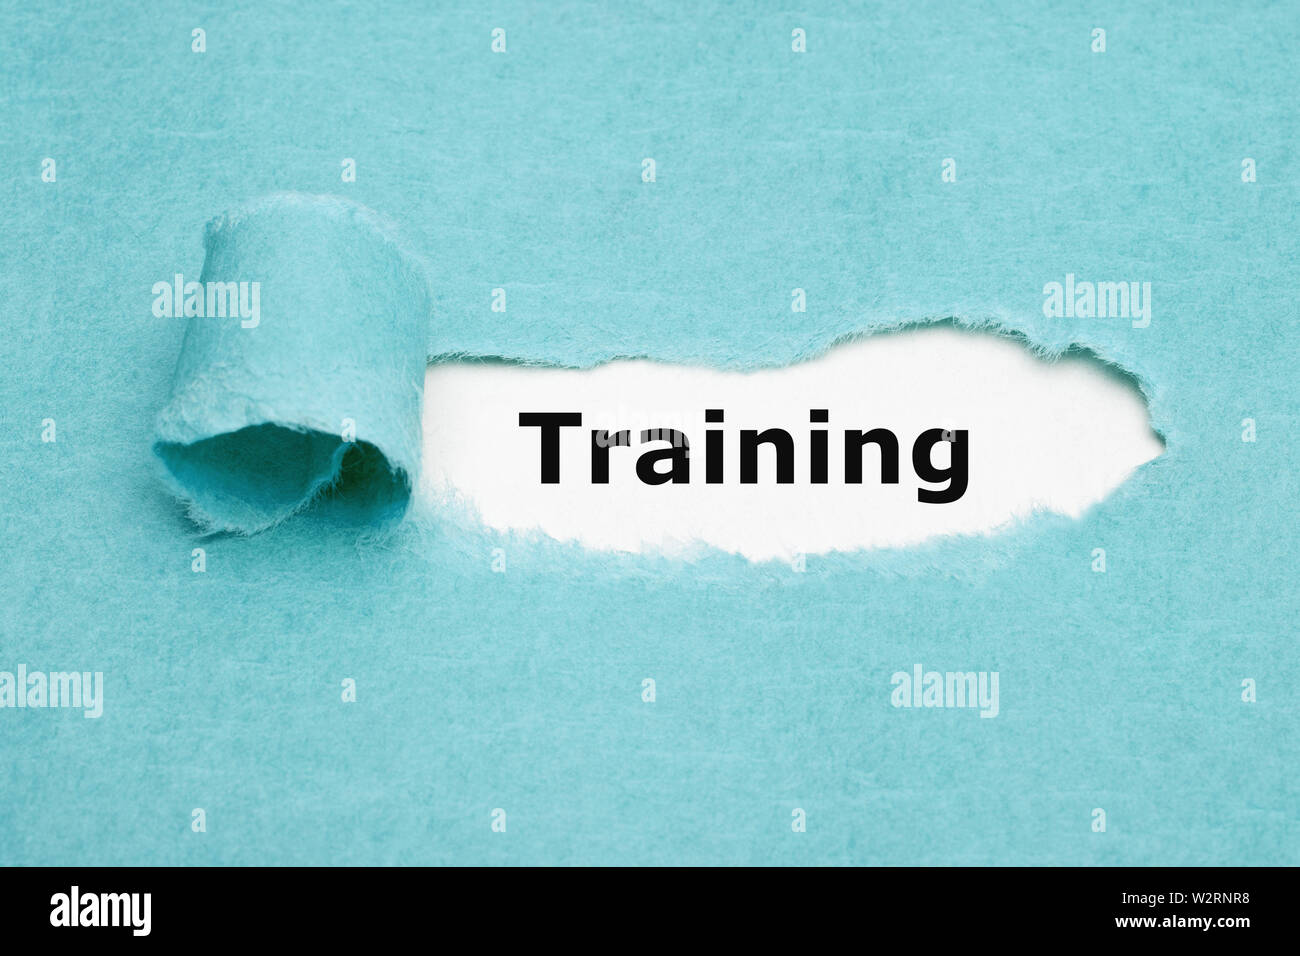 Printed word Training appearing behind ripped blue paper. Concept about learning and practising new skills of a particular job. Stock Photo